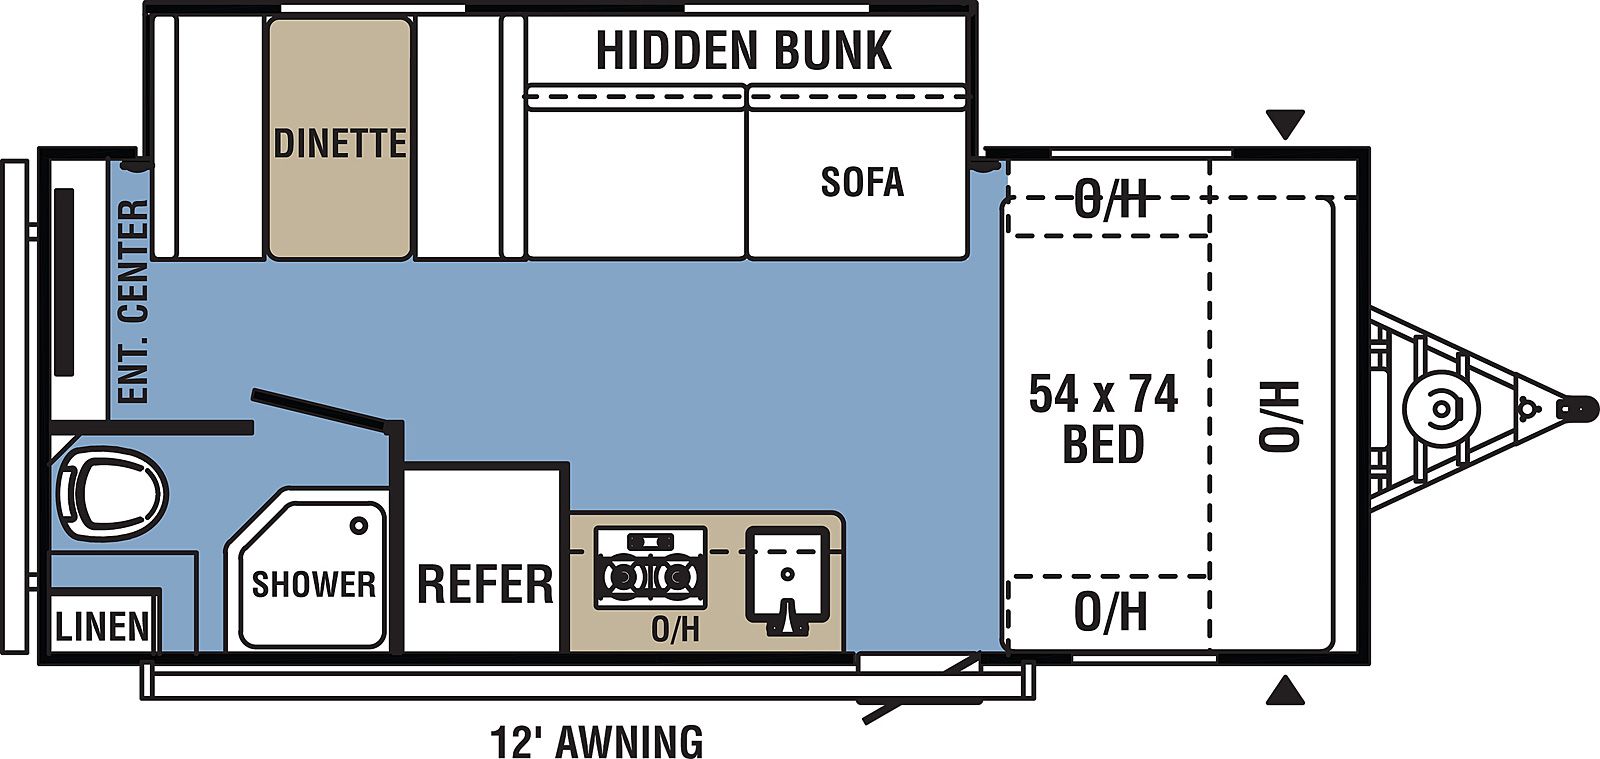 Clipper Ultra-Lite 18RBSS floorplan. The 18RBSS has one slide out and one entry door.